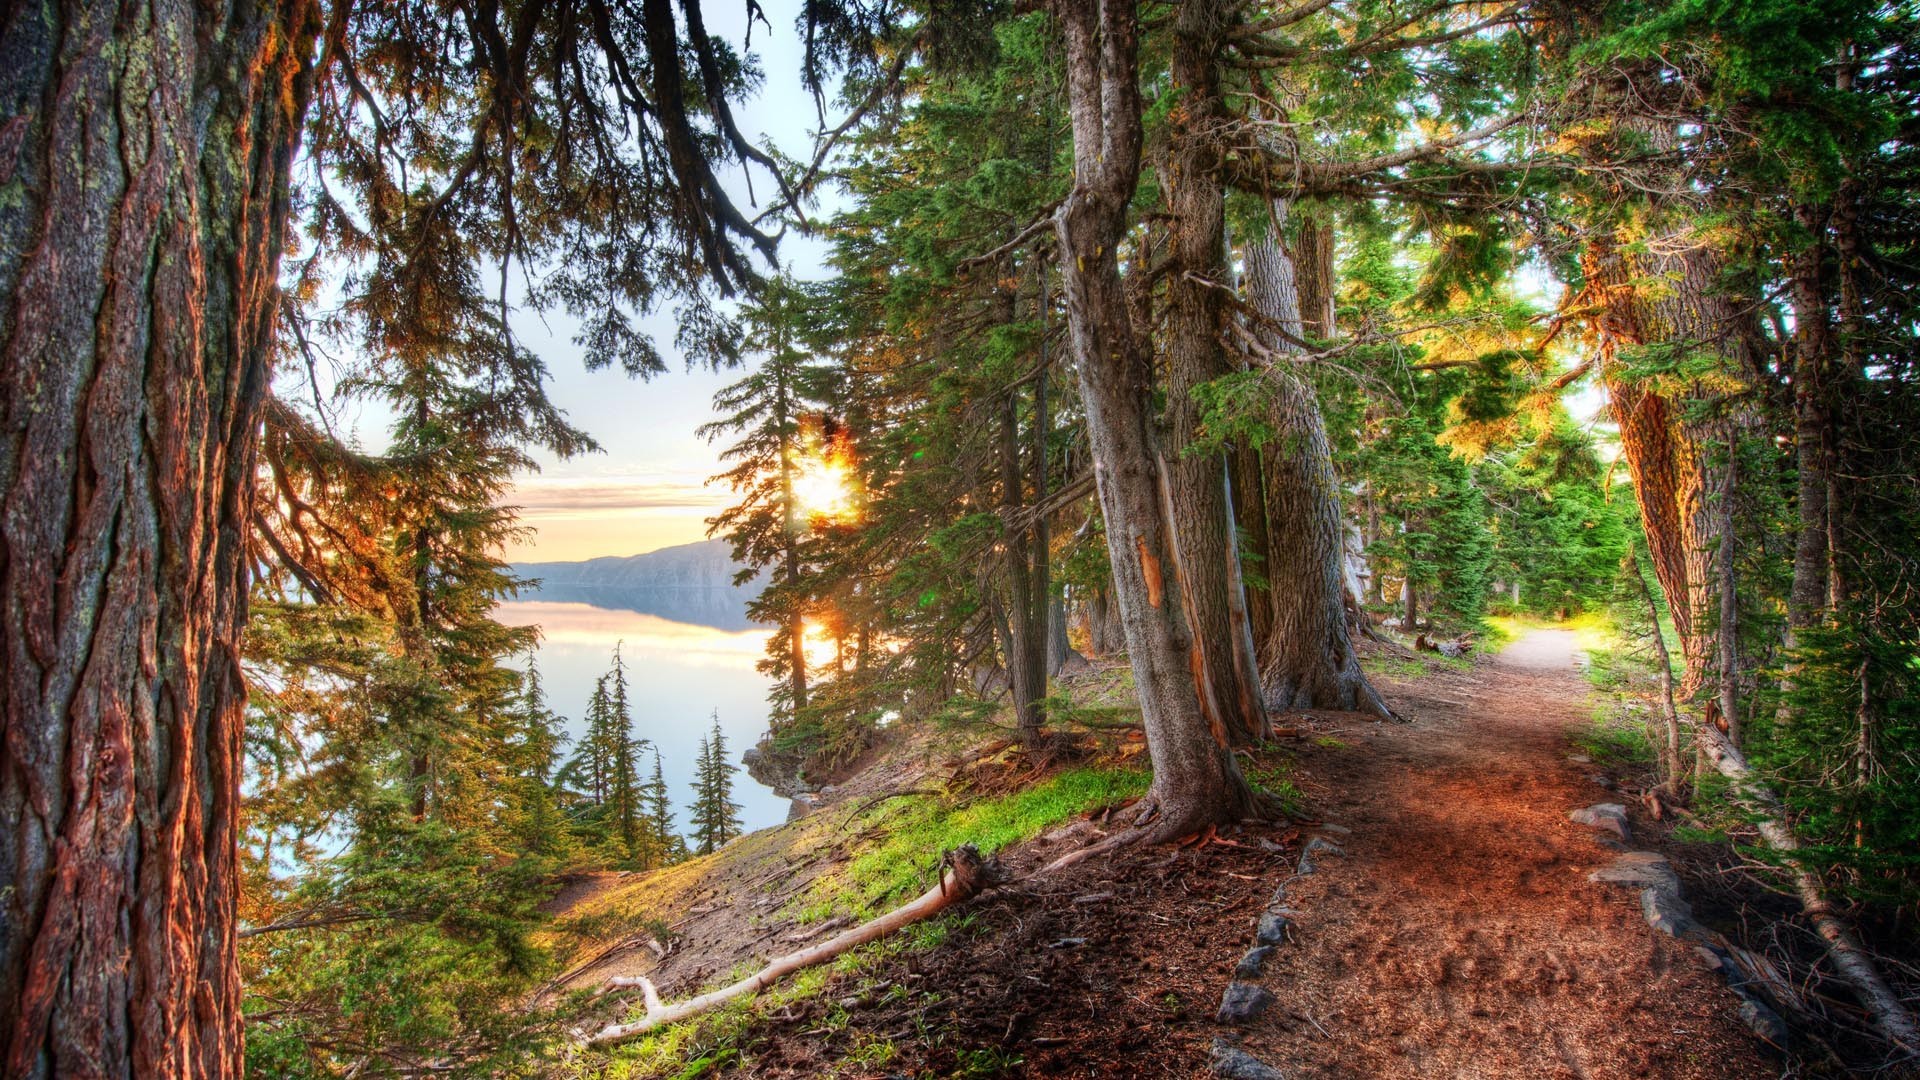 General 1920x1080 nature HDR landscape lake trees forest path dirt road sunlight crater lake